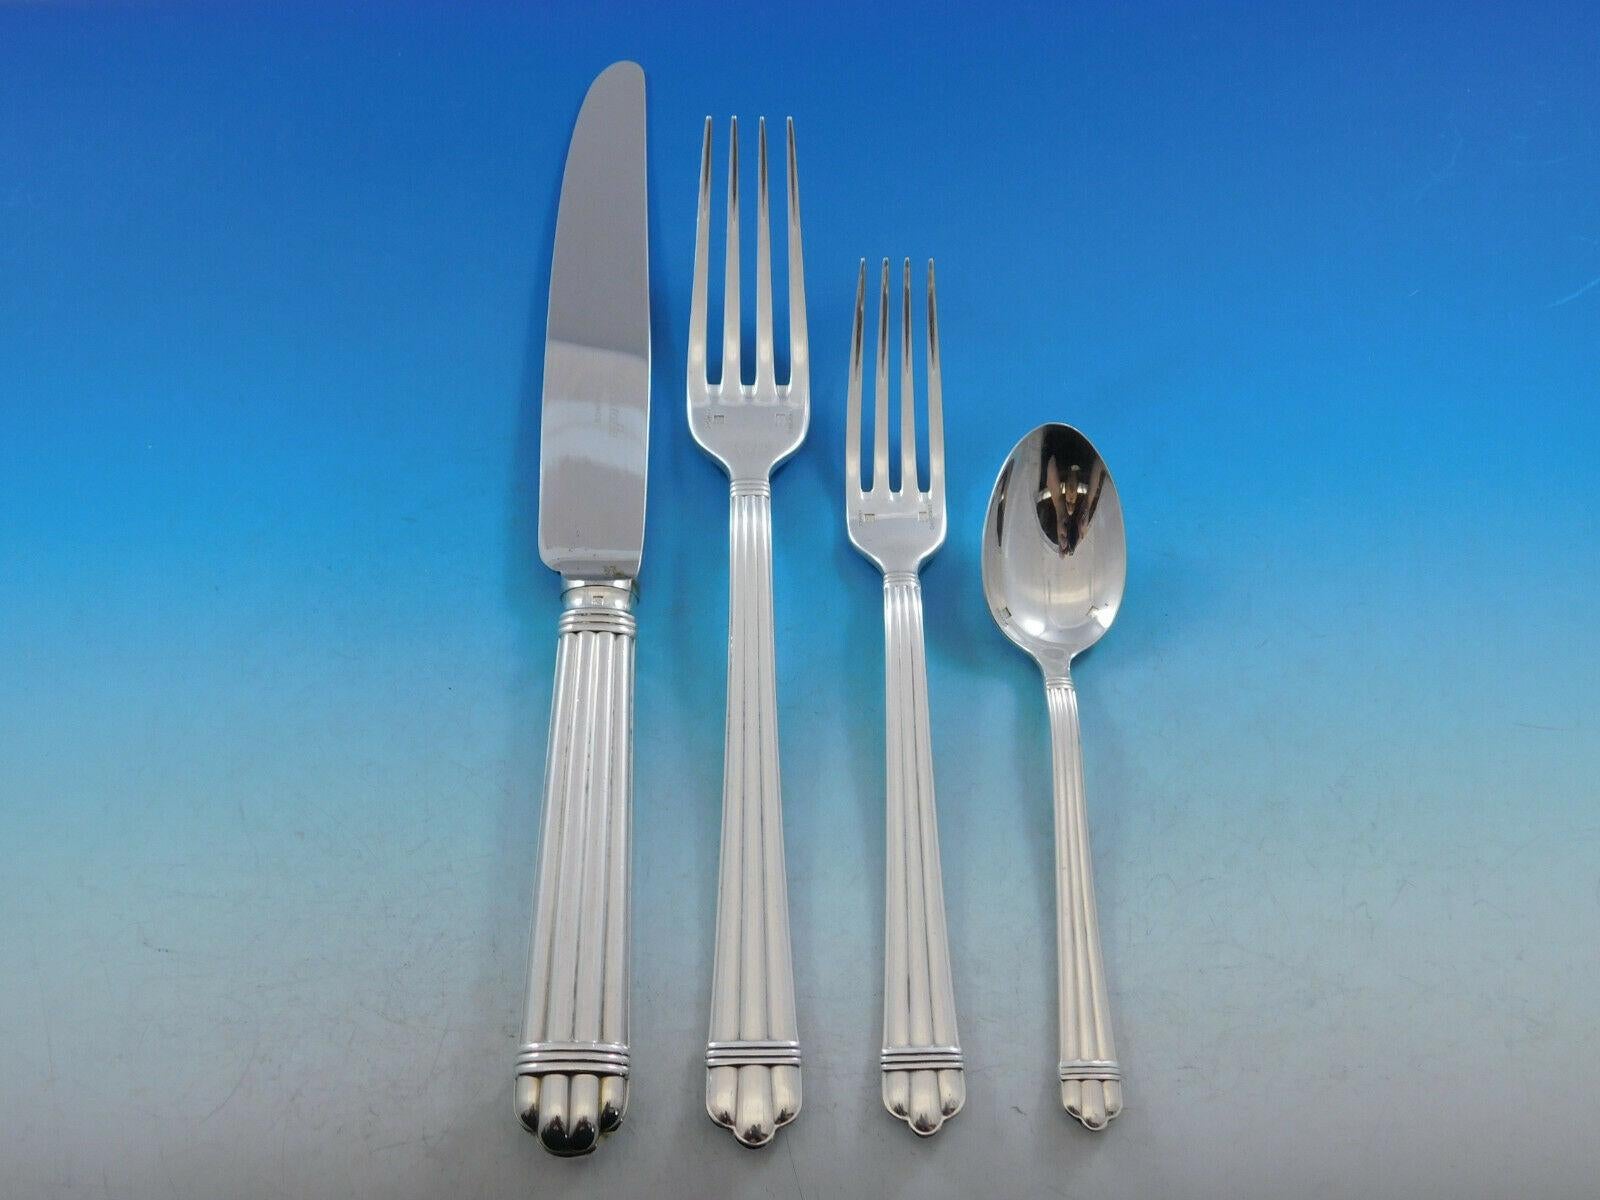 Dinner size Aria by Christofle France estate silver plate flatware set, 52 pieces. This set includes:

8 dinner size knives, 9 3/4